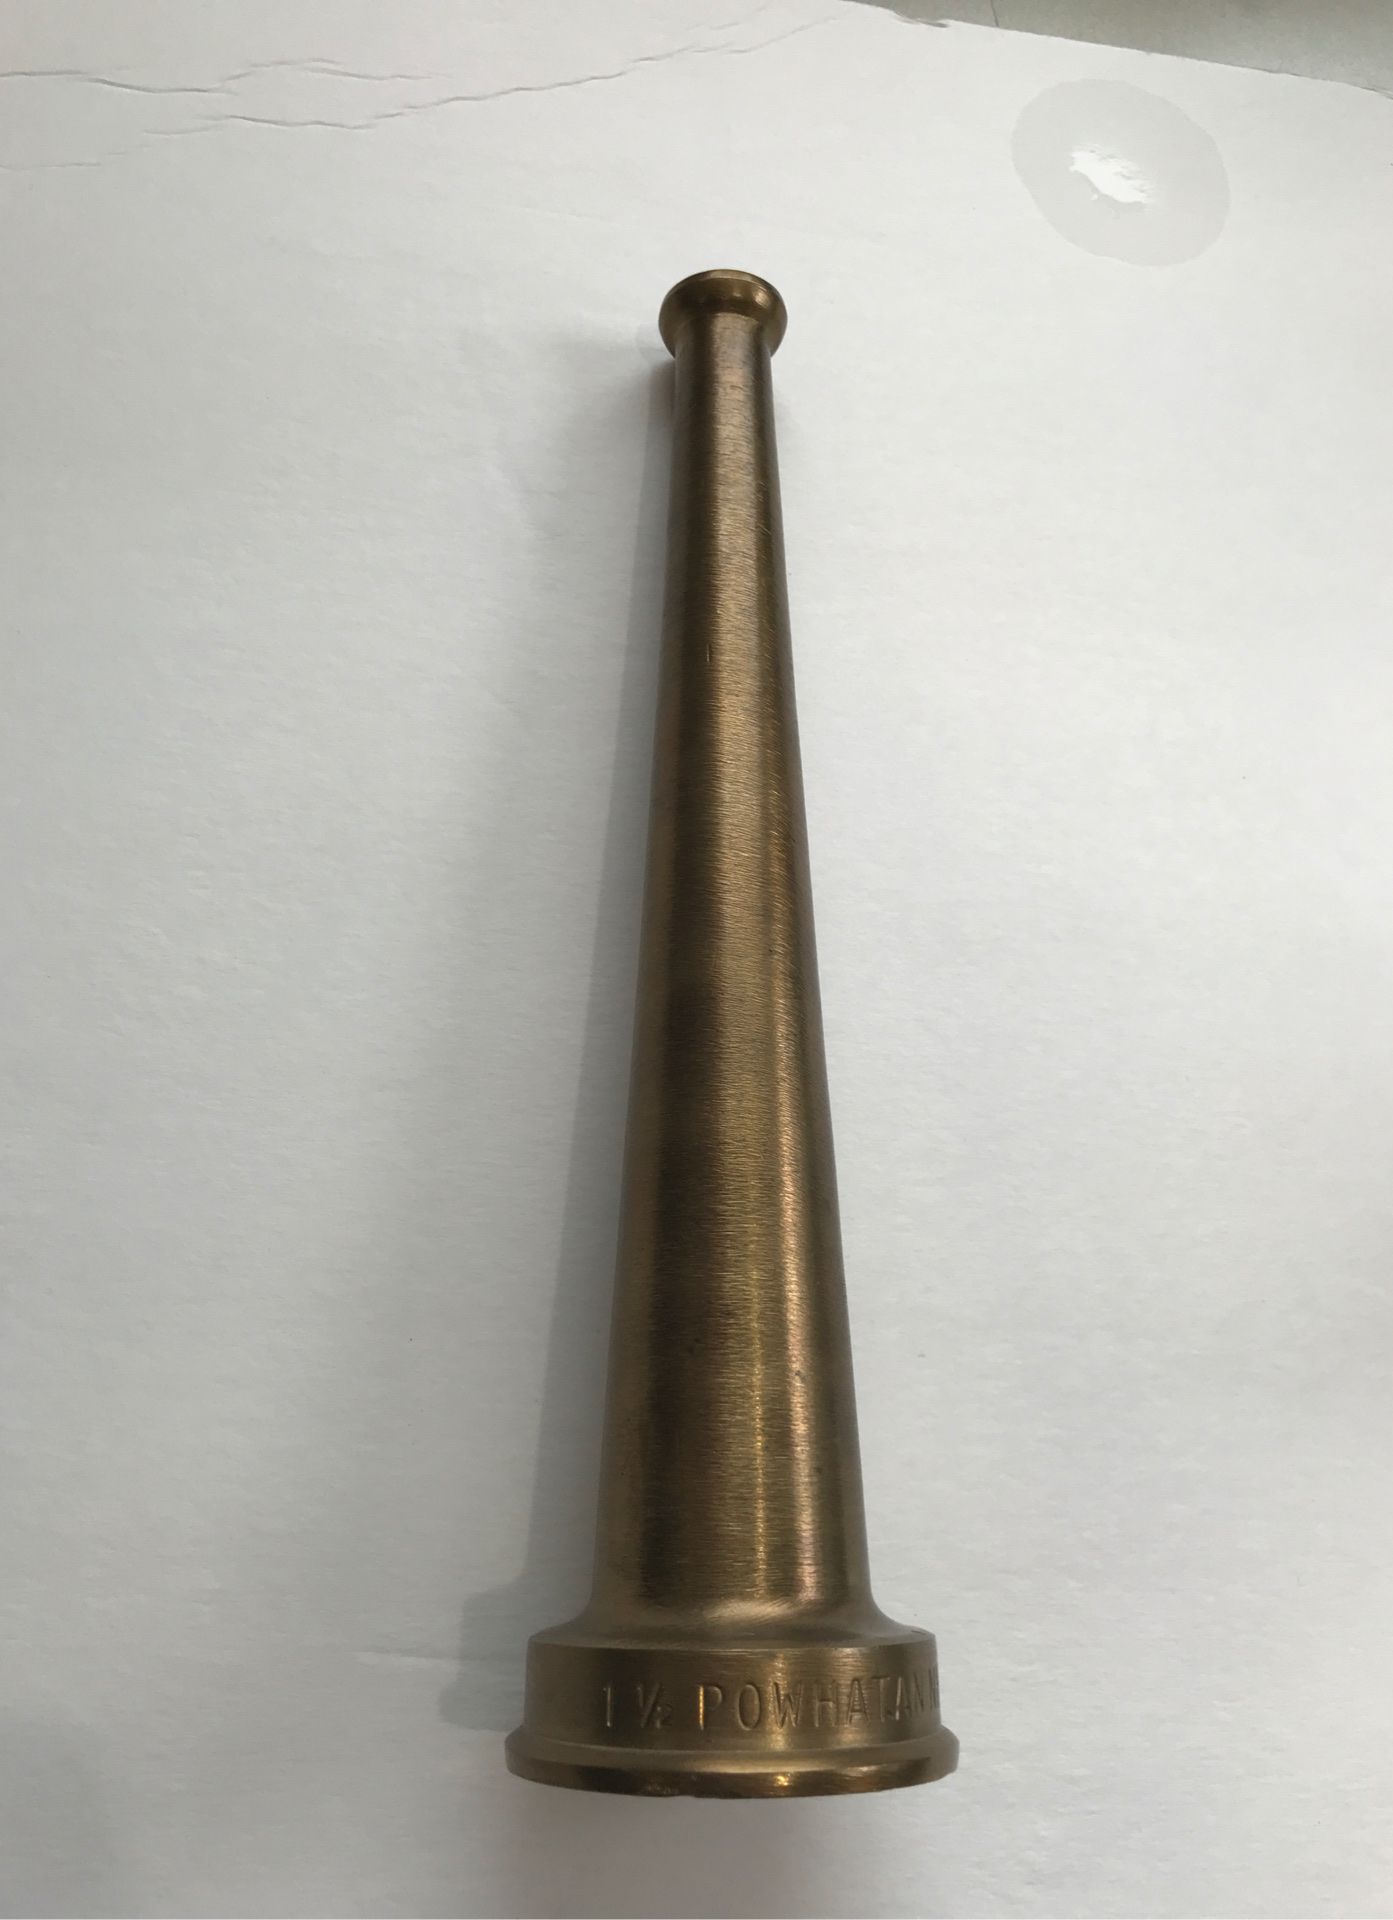 Vintage 1 1/2 POWHAT. AN NH Solid Brass Fire Hose Water Nozzle 10 inch